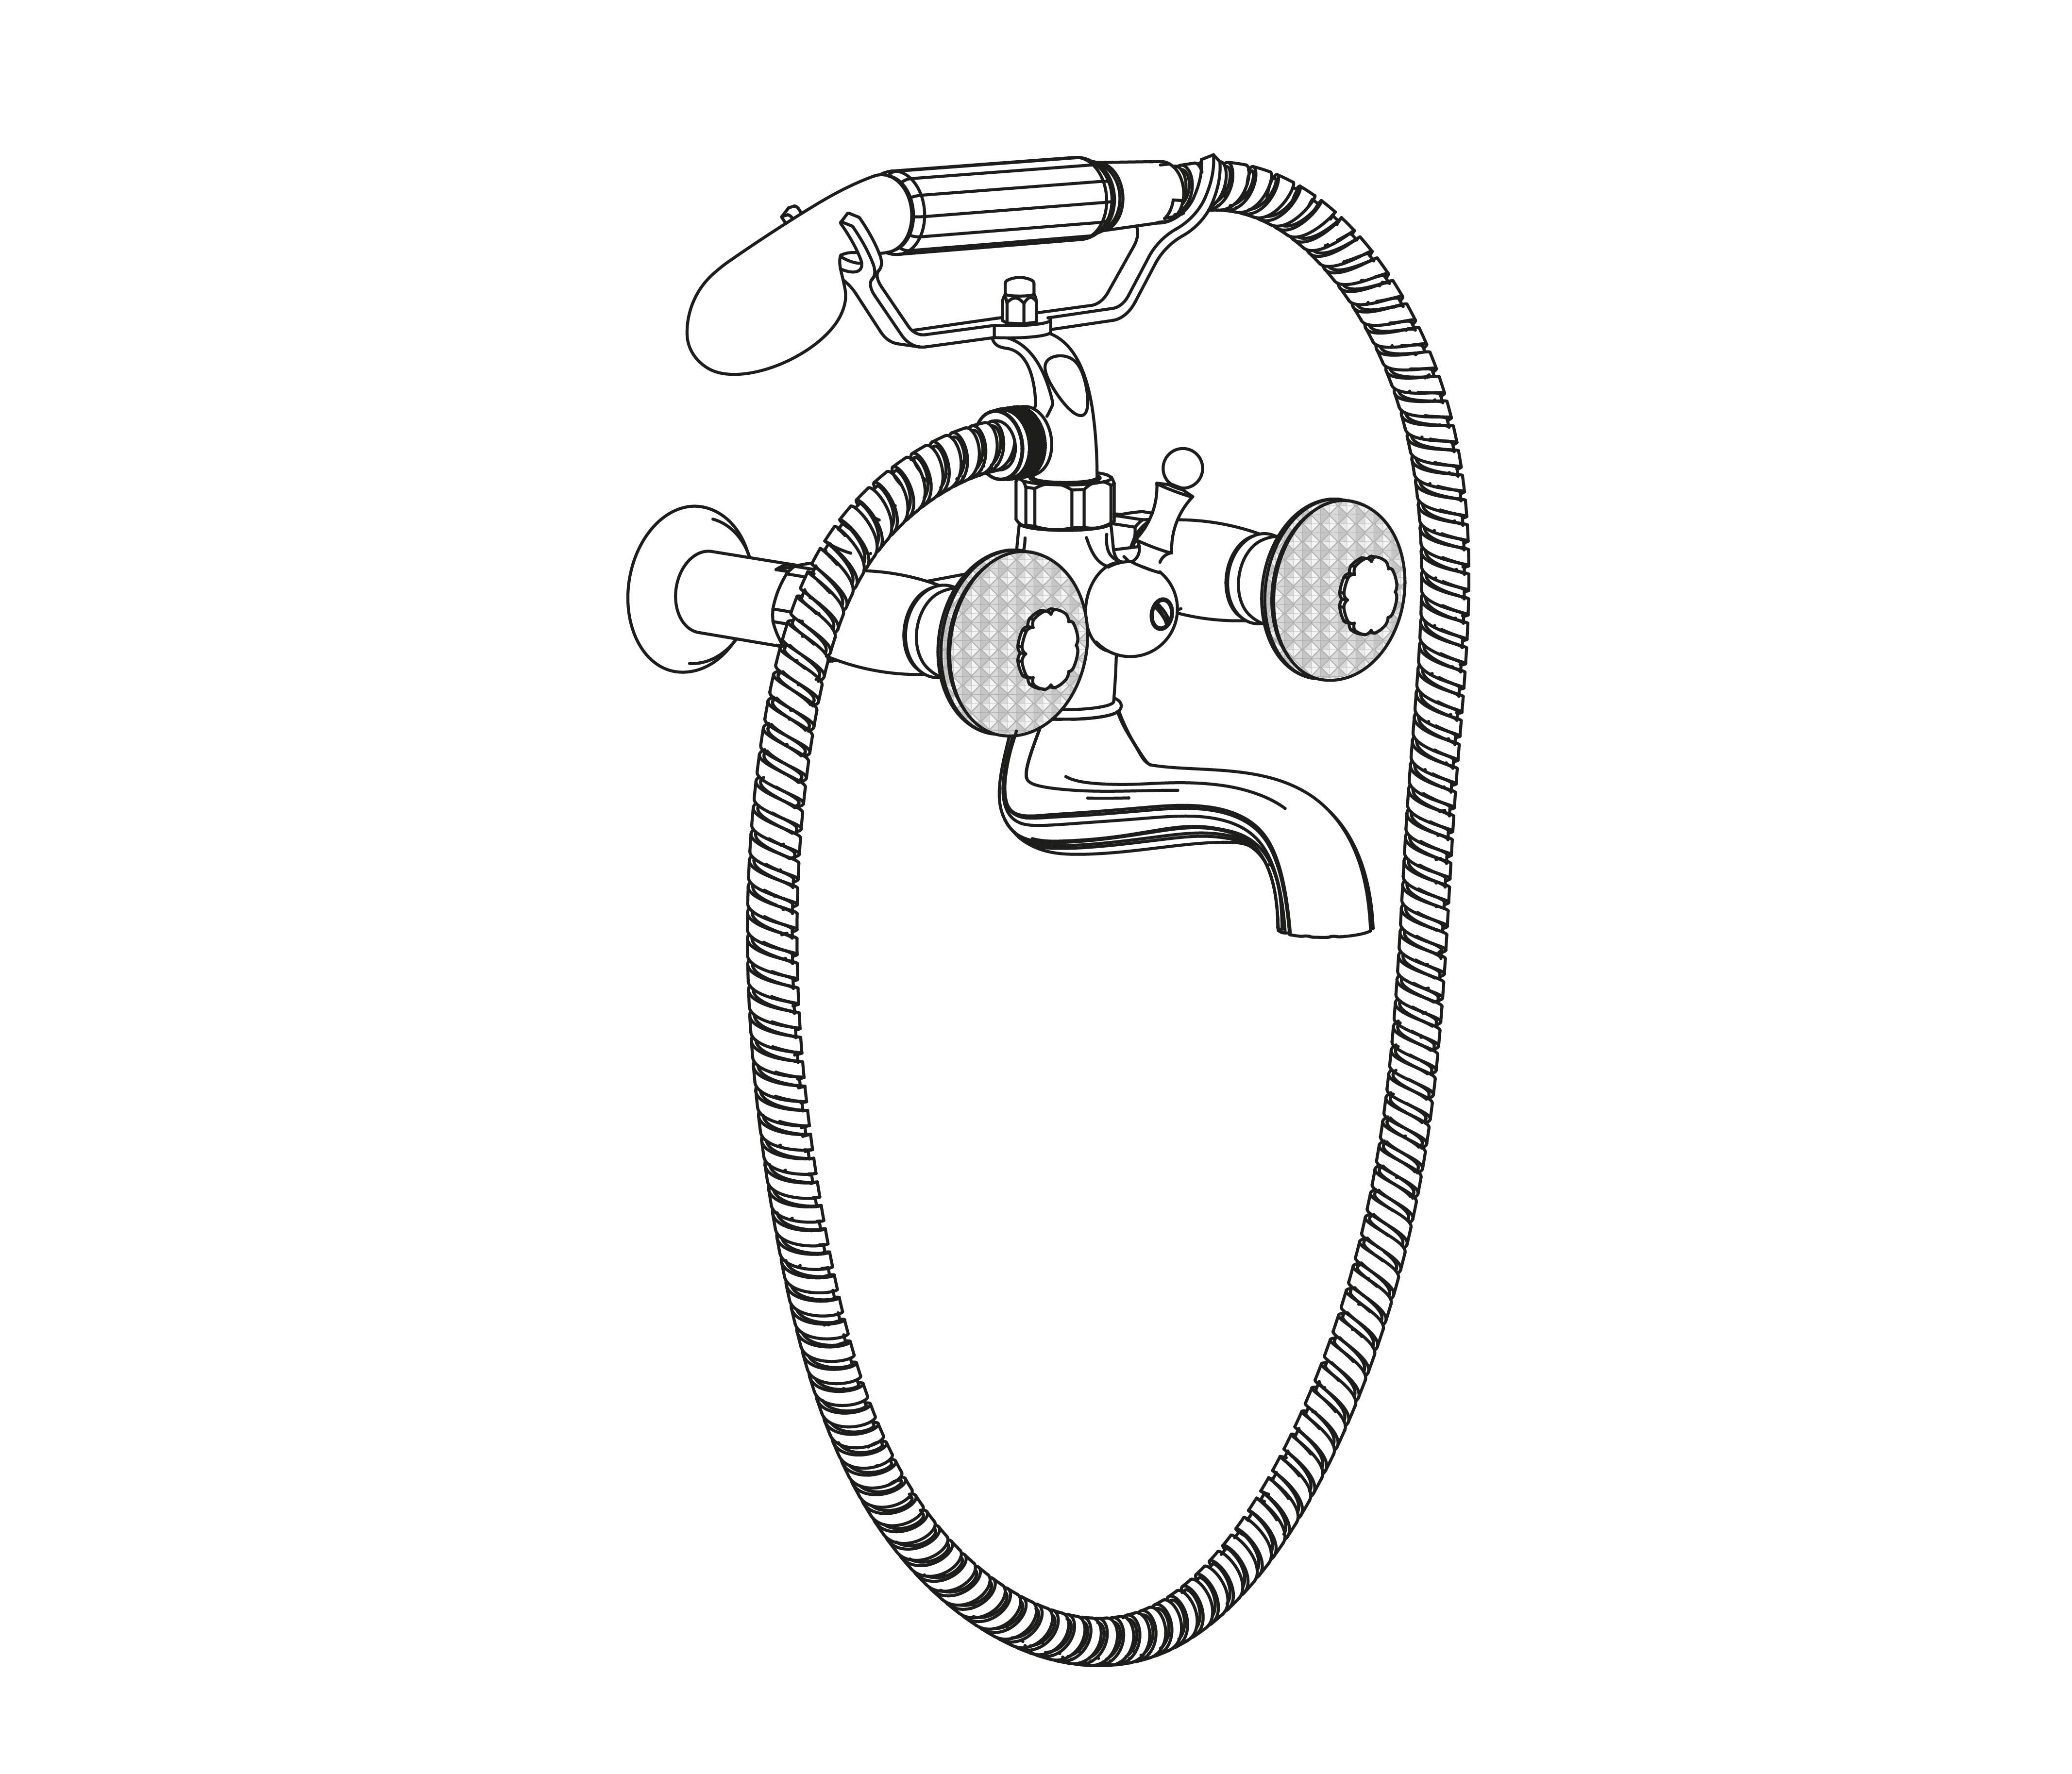 C47-3201 Wall mounted bath and shower mixer